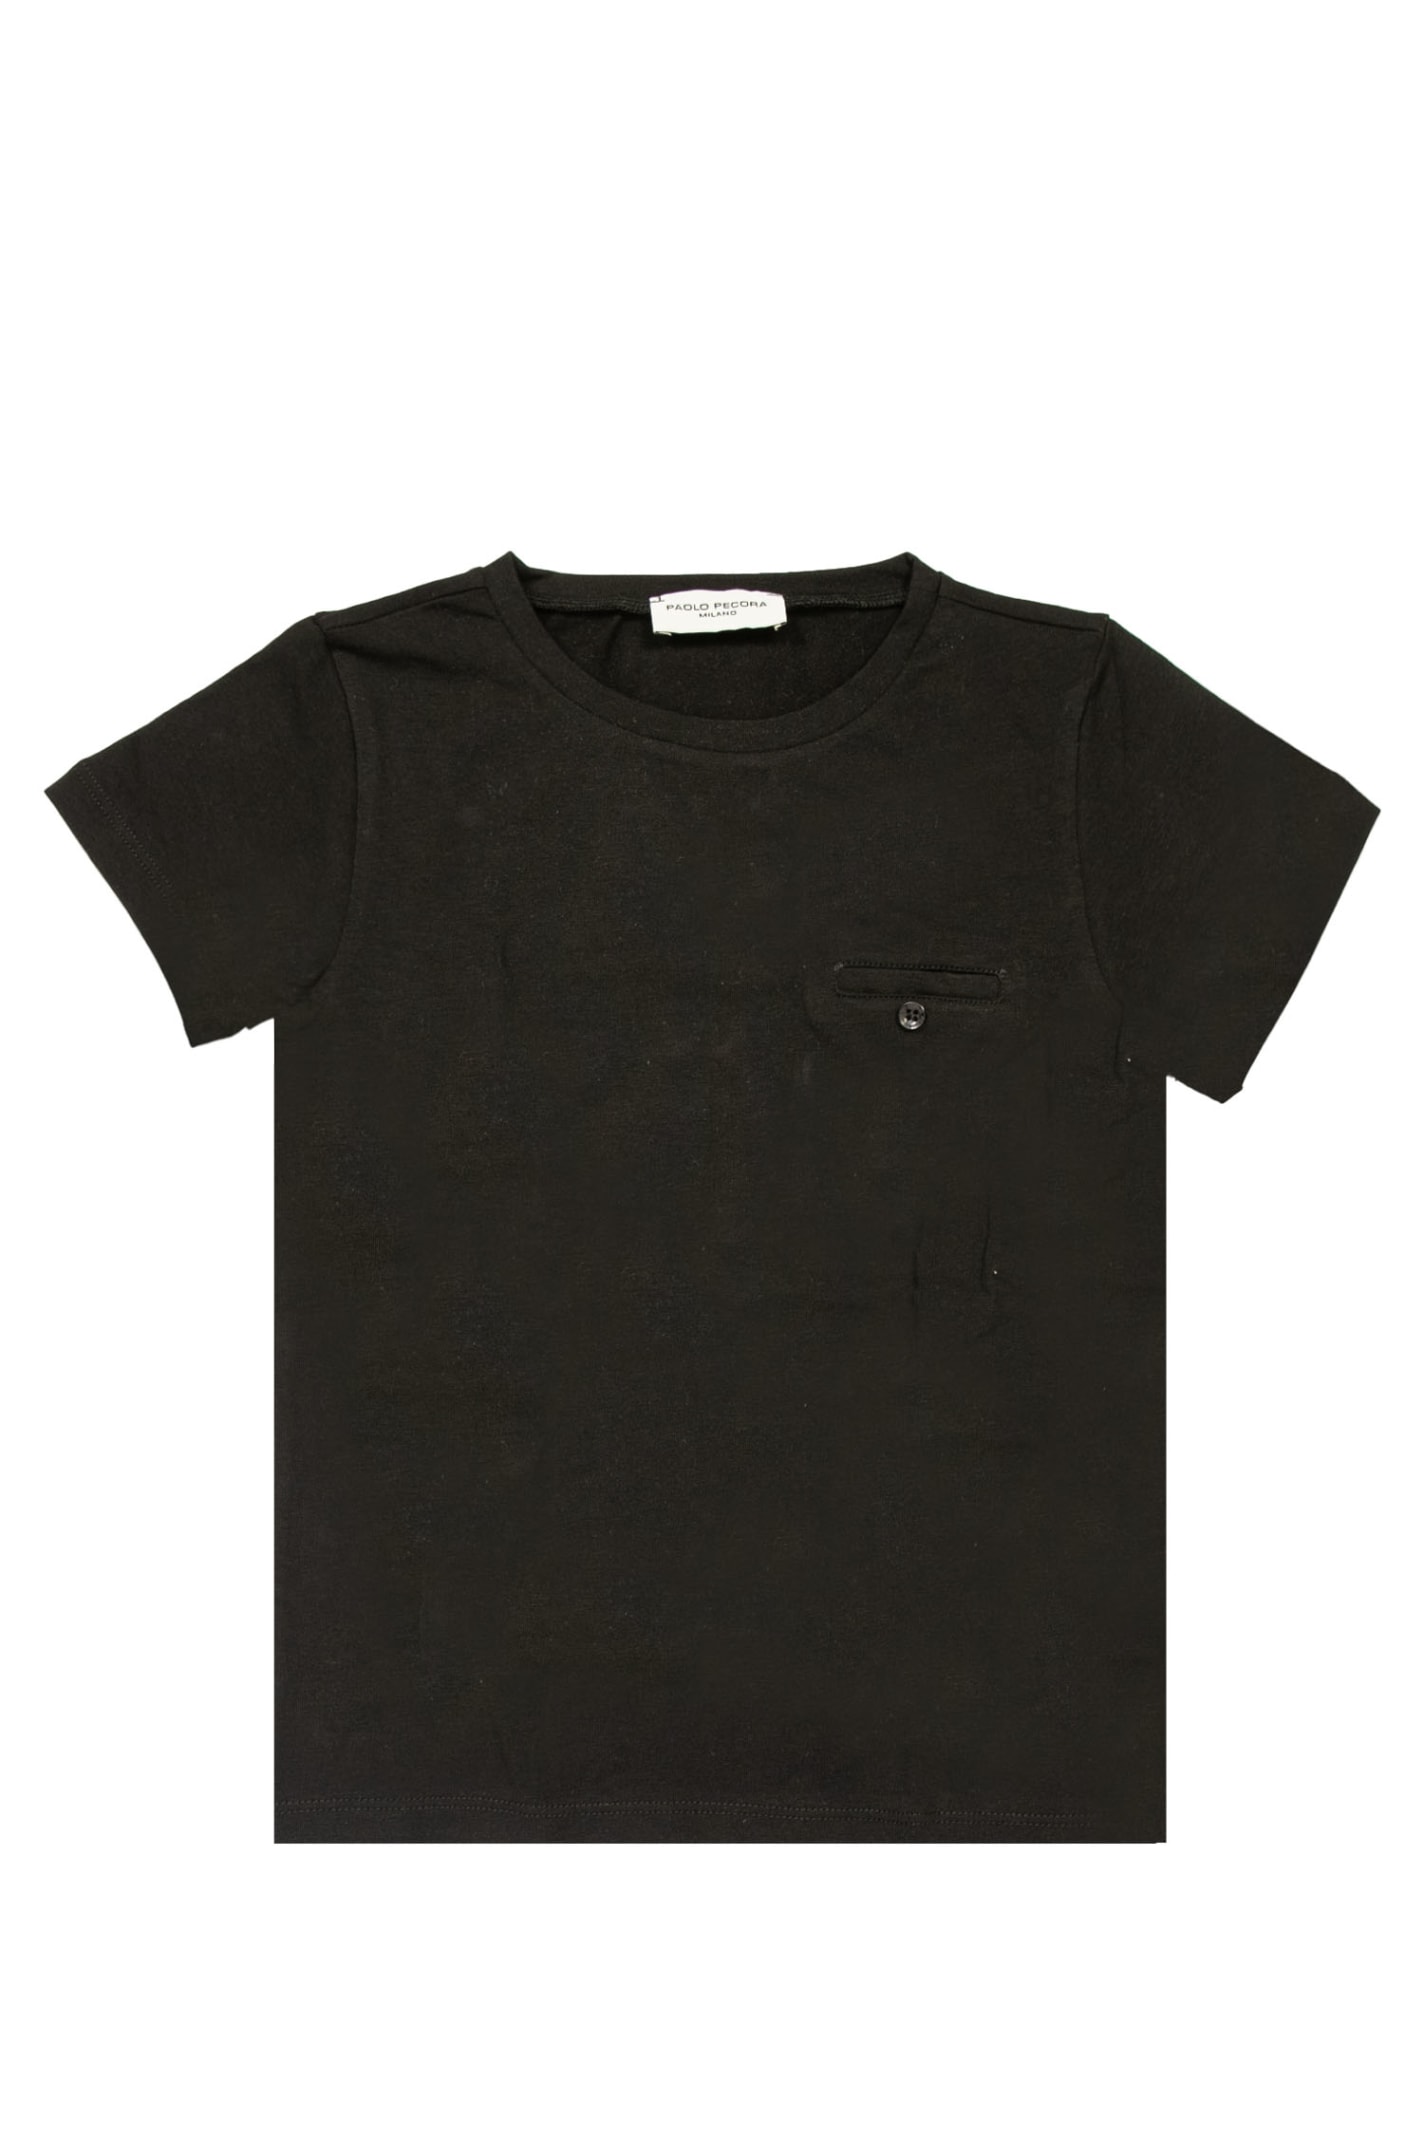 Paolo Pecora Kids' Cotton T-shirt In Back